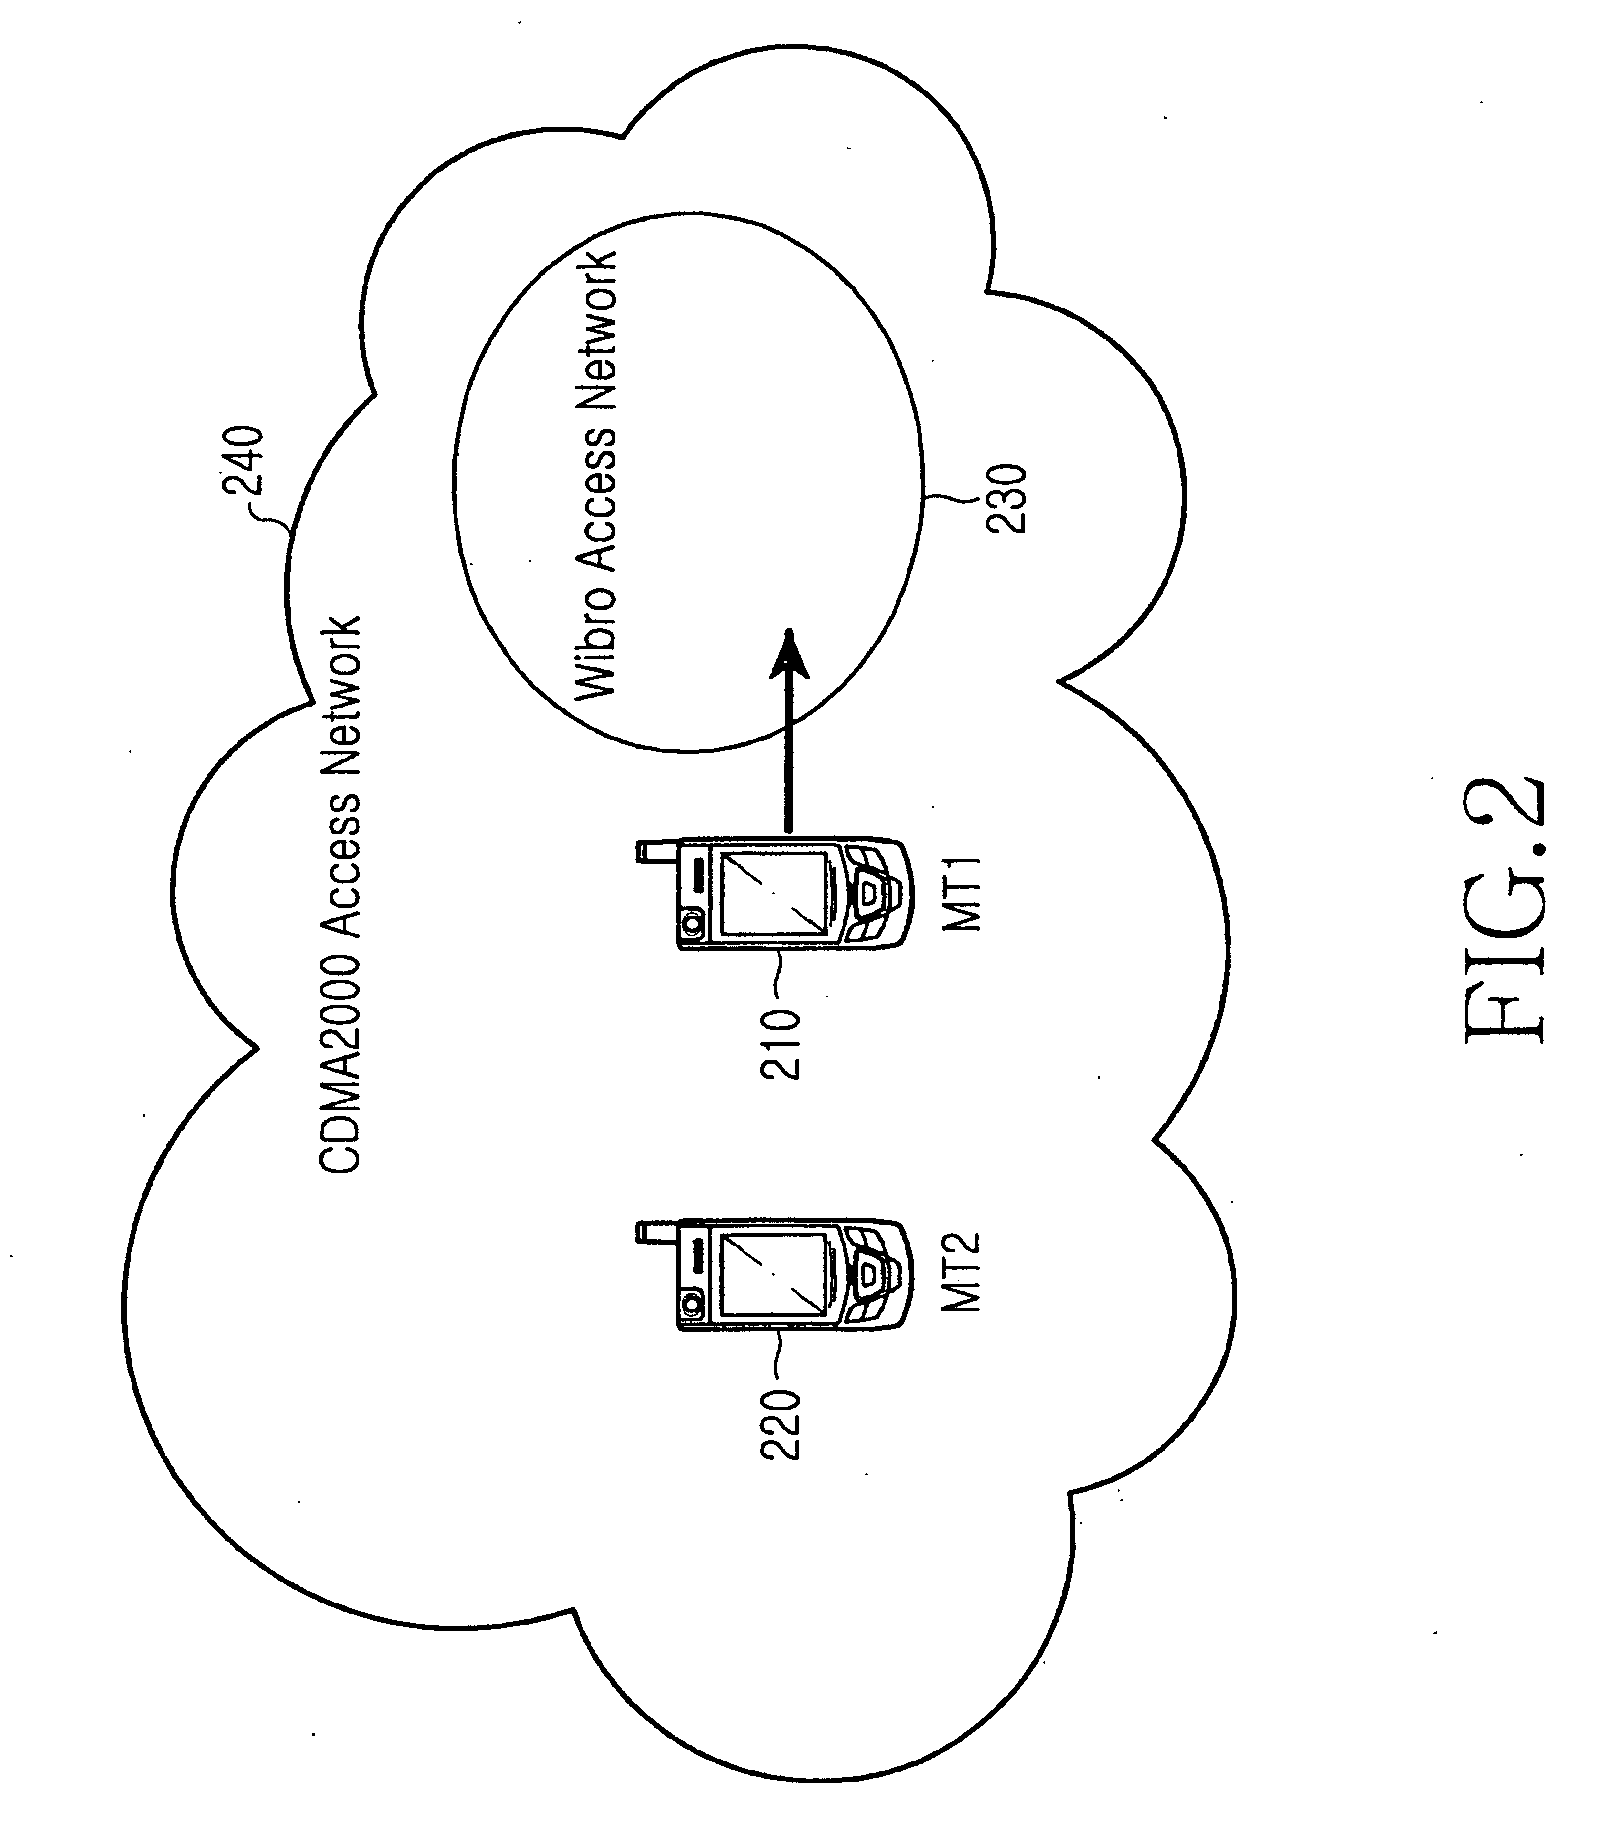 System and method for voice data handoff between cellular network and WiBro/WLAN network in heterogeneous network environment